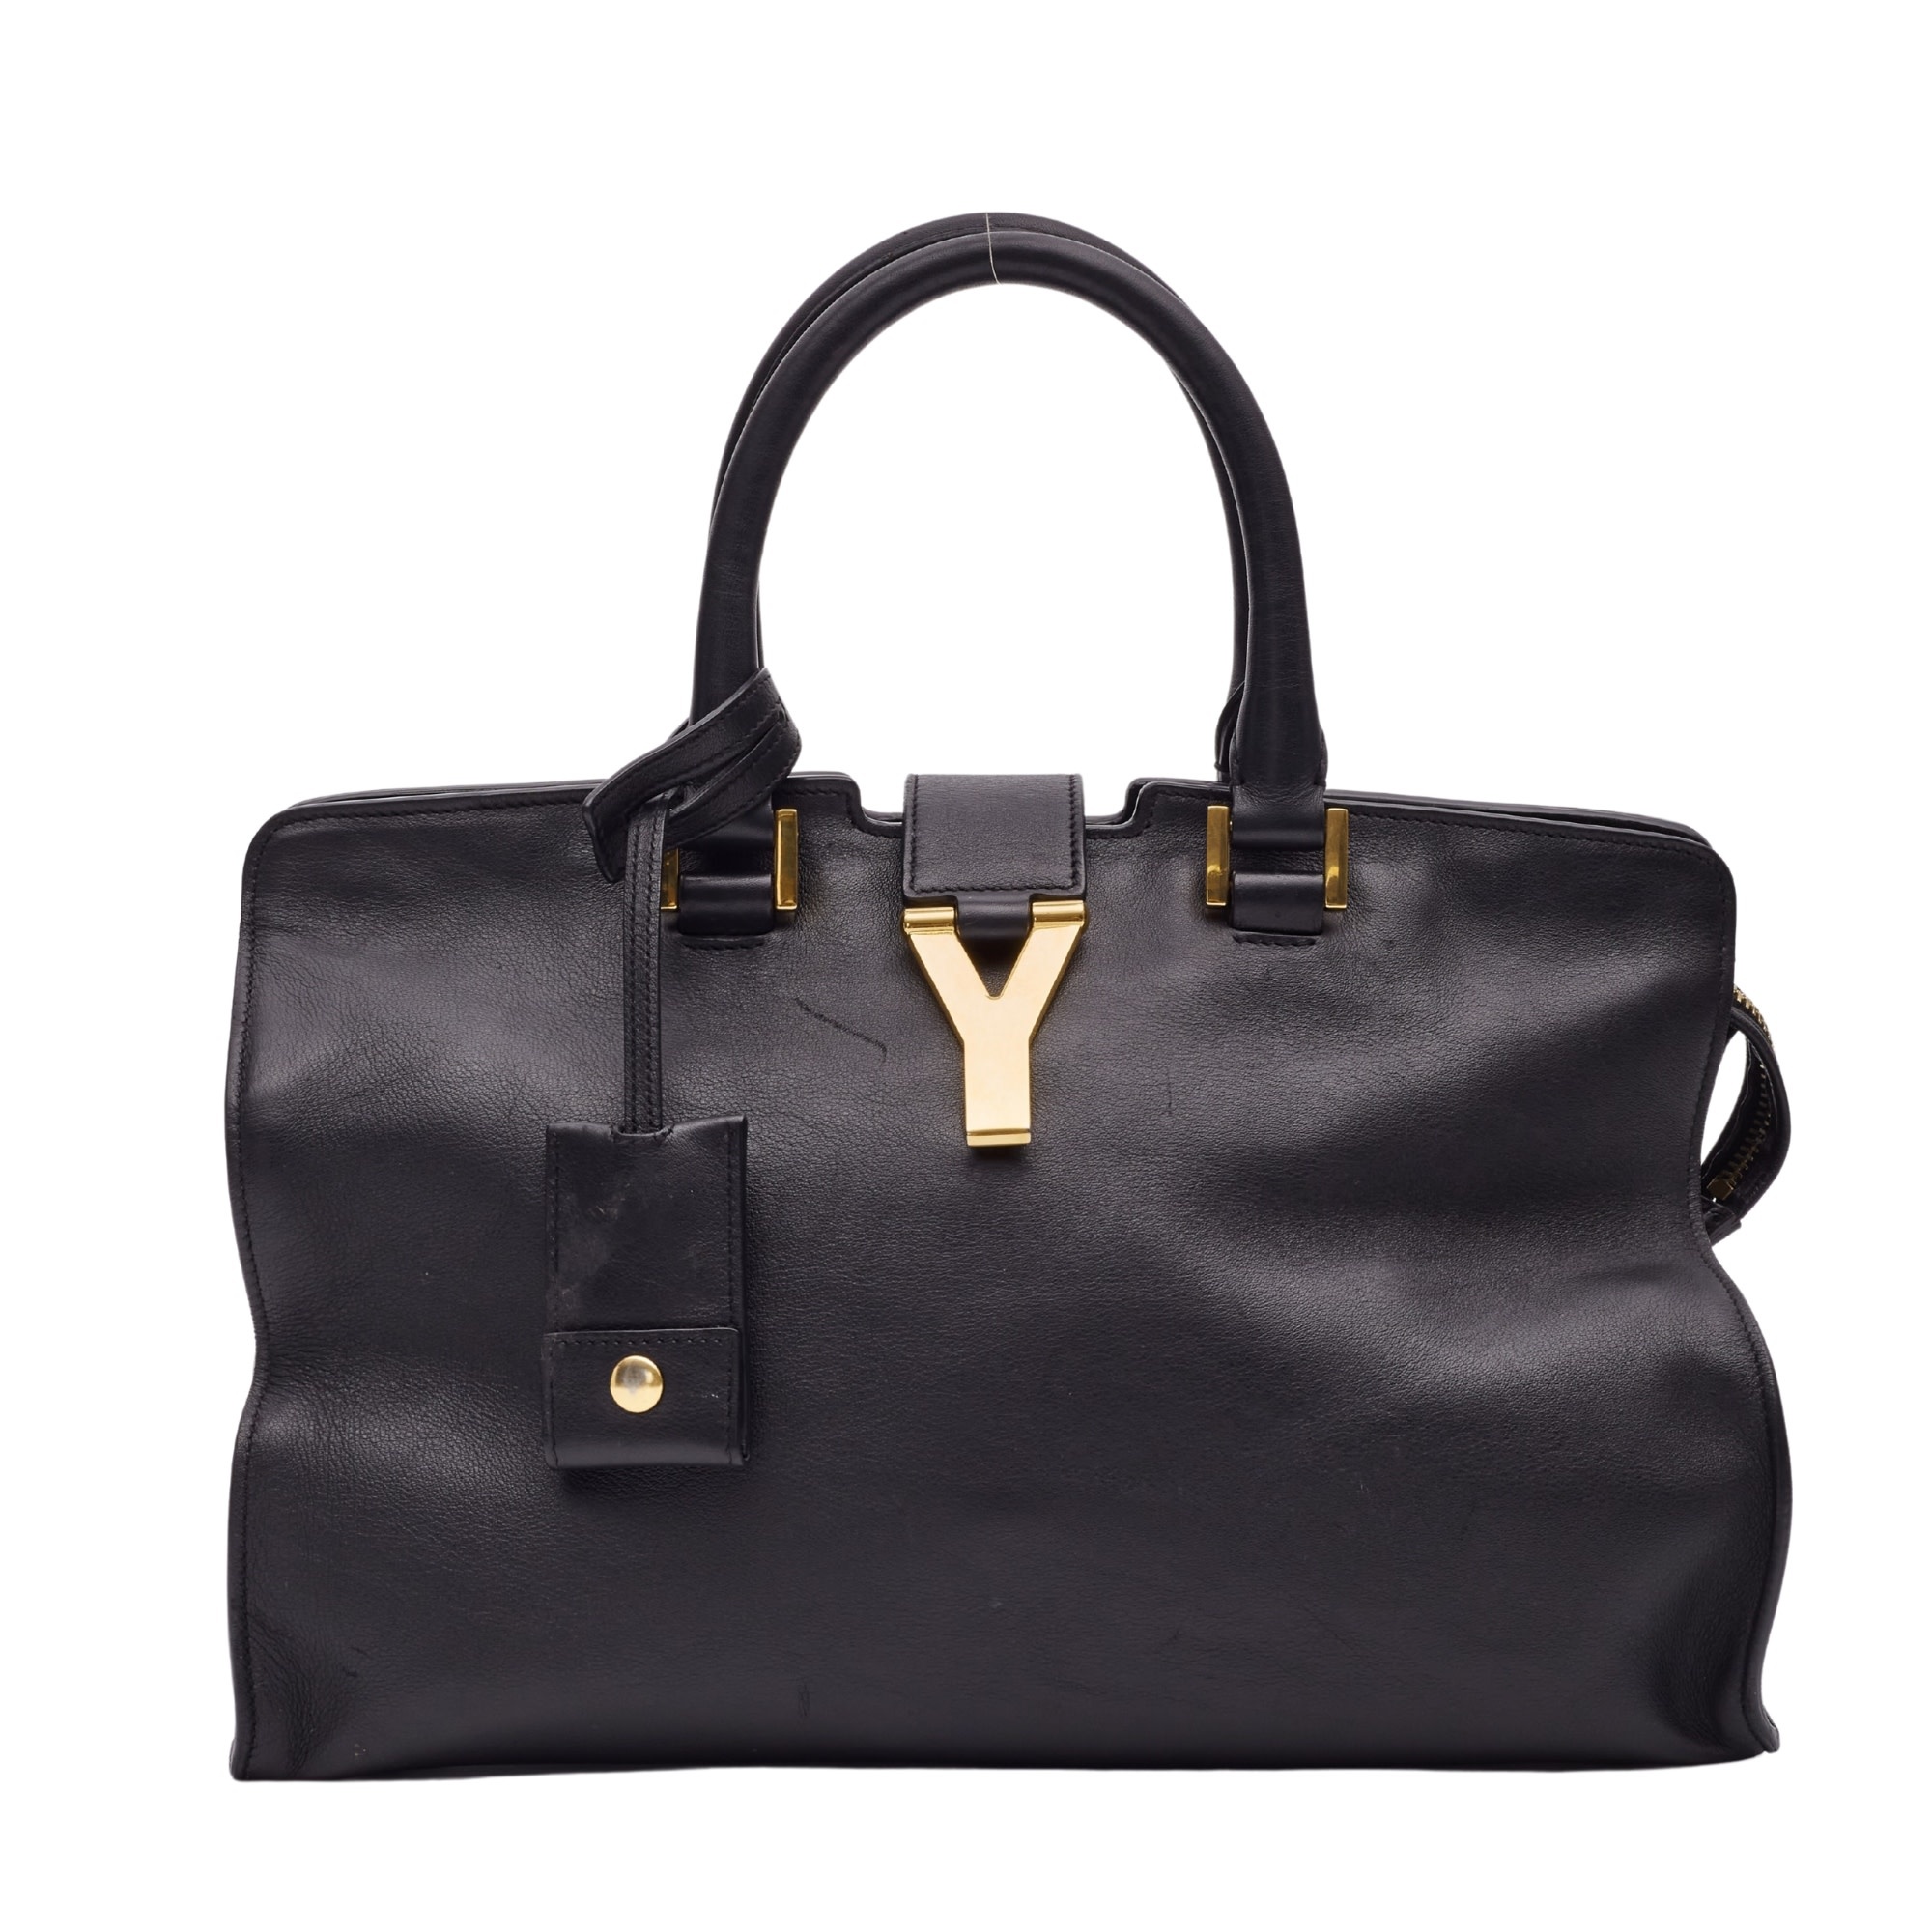 SAINT LAURENT BLACK SMOOTH CALFSKIN LEATHER SMALL CABAS CLASSIC Y BAG